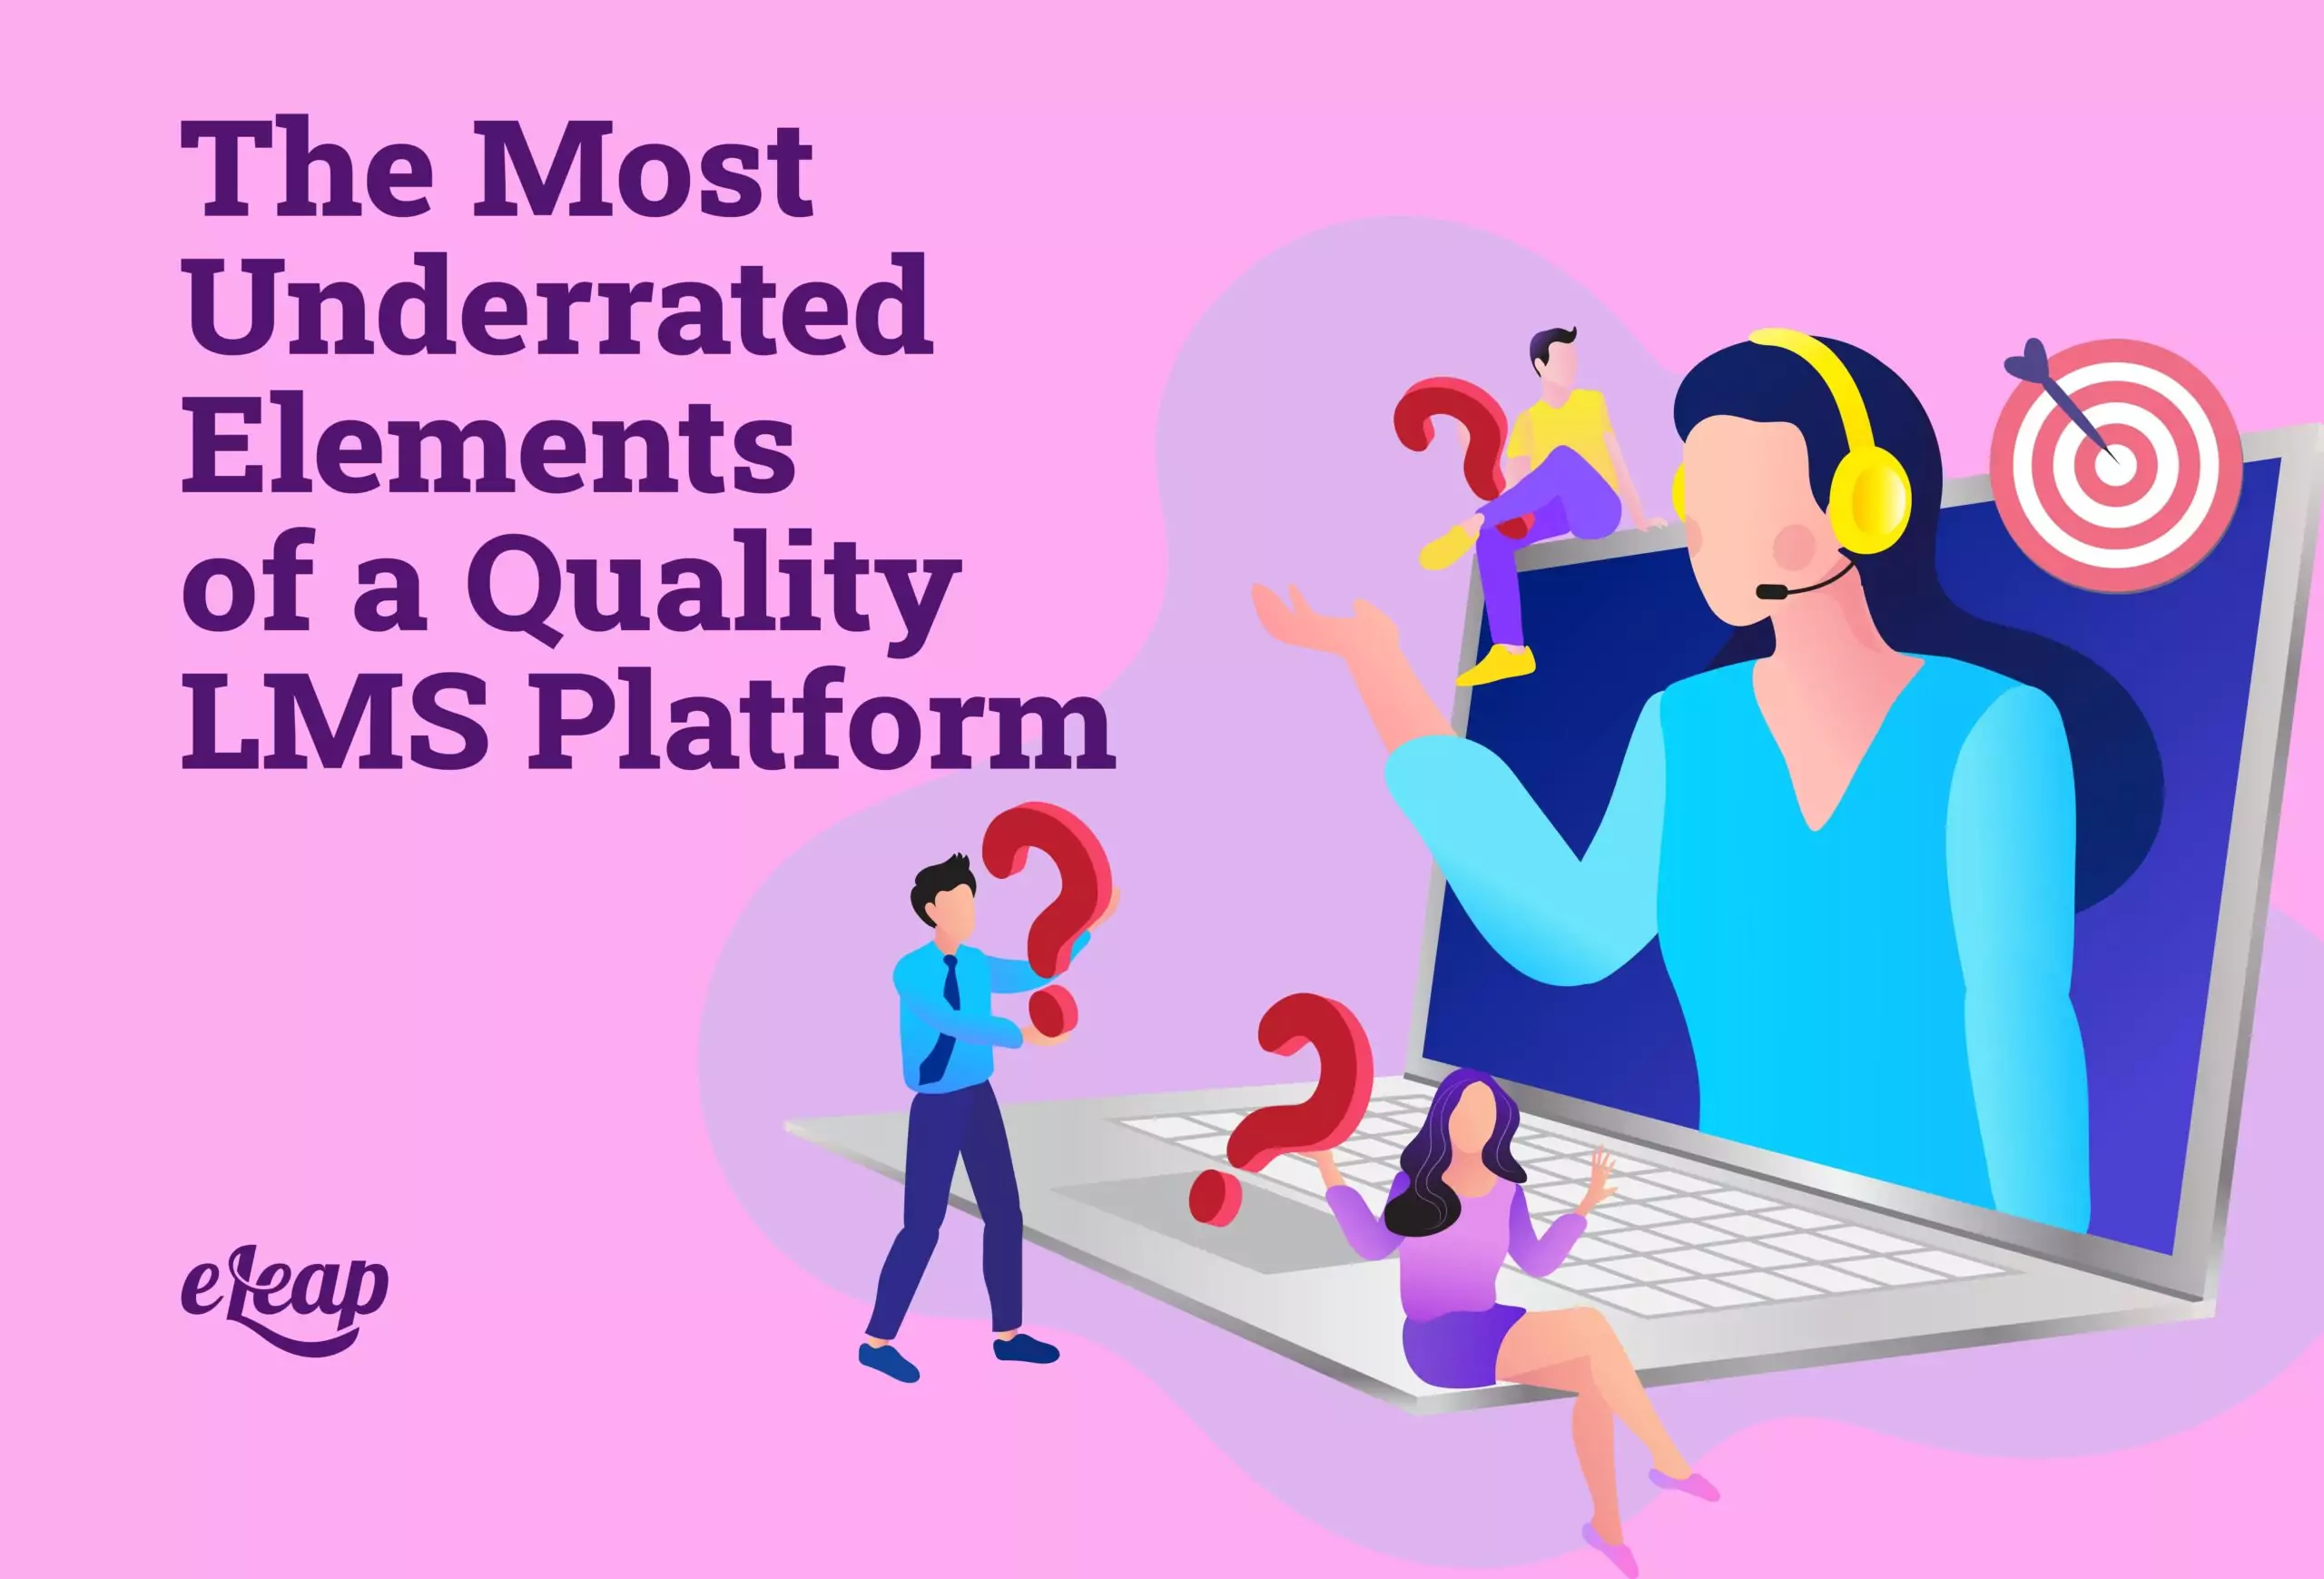 The Most Underrated Elements of a Quality LMS Platform